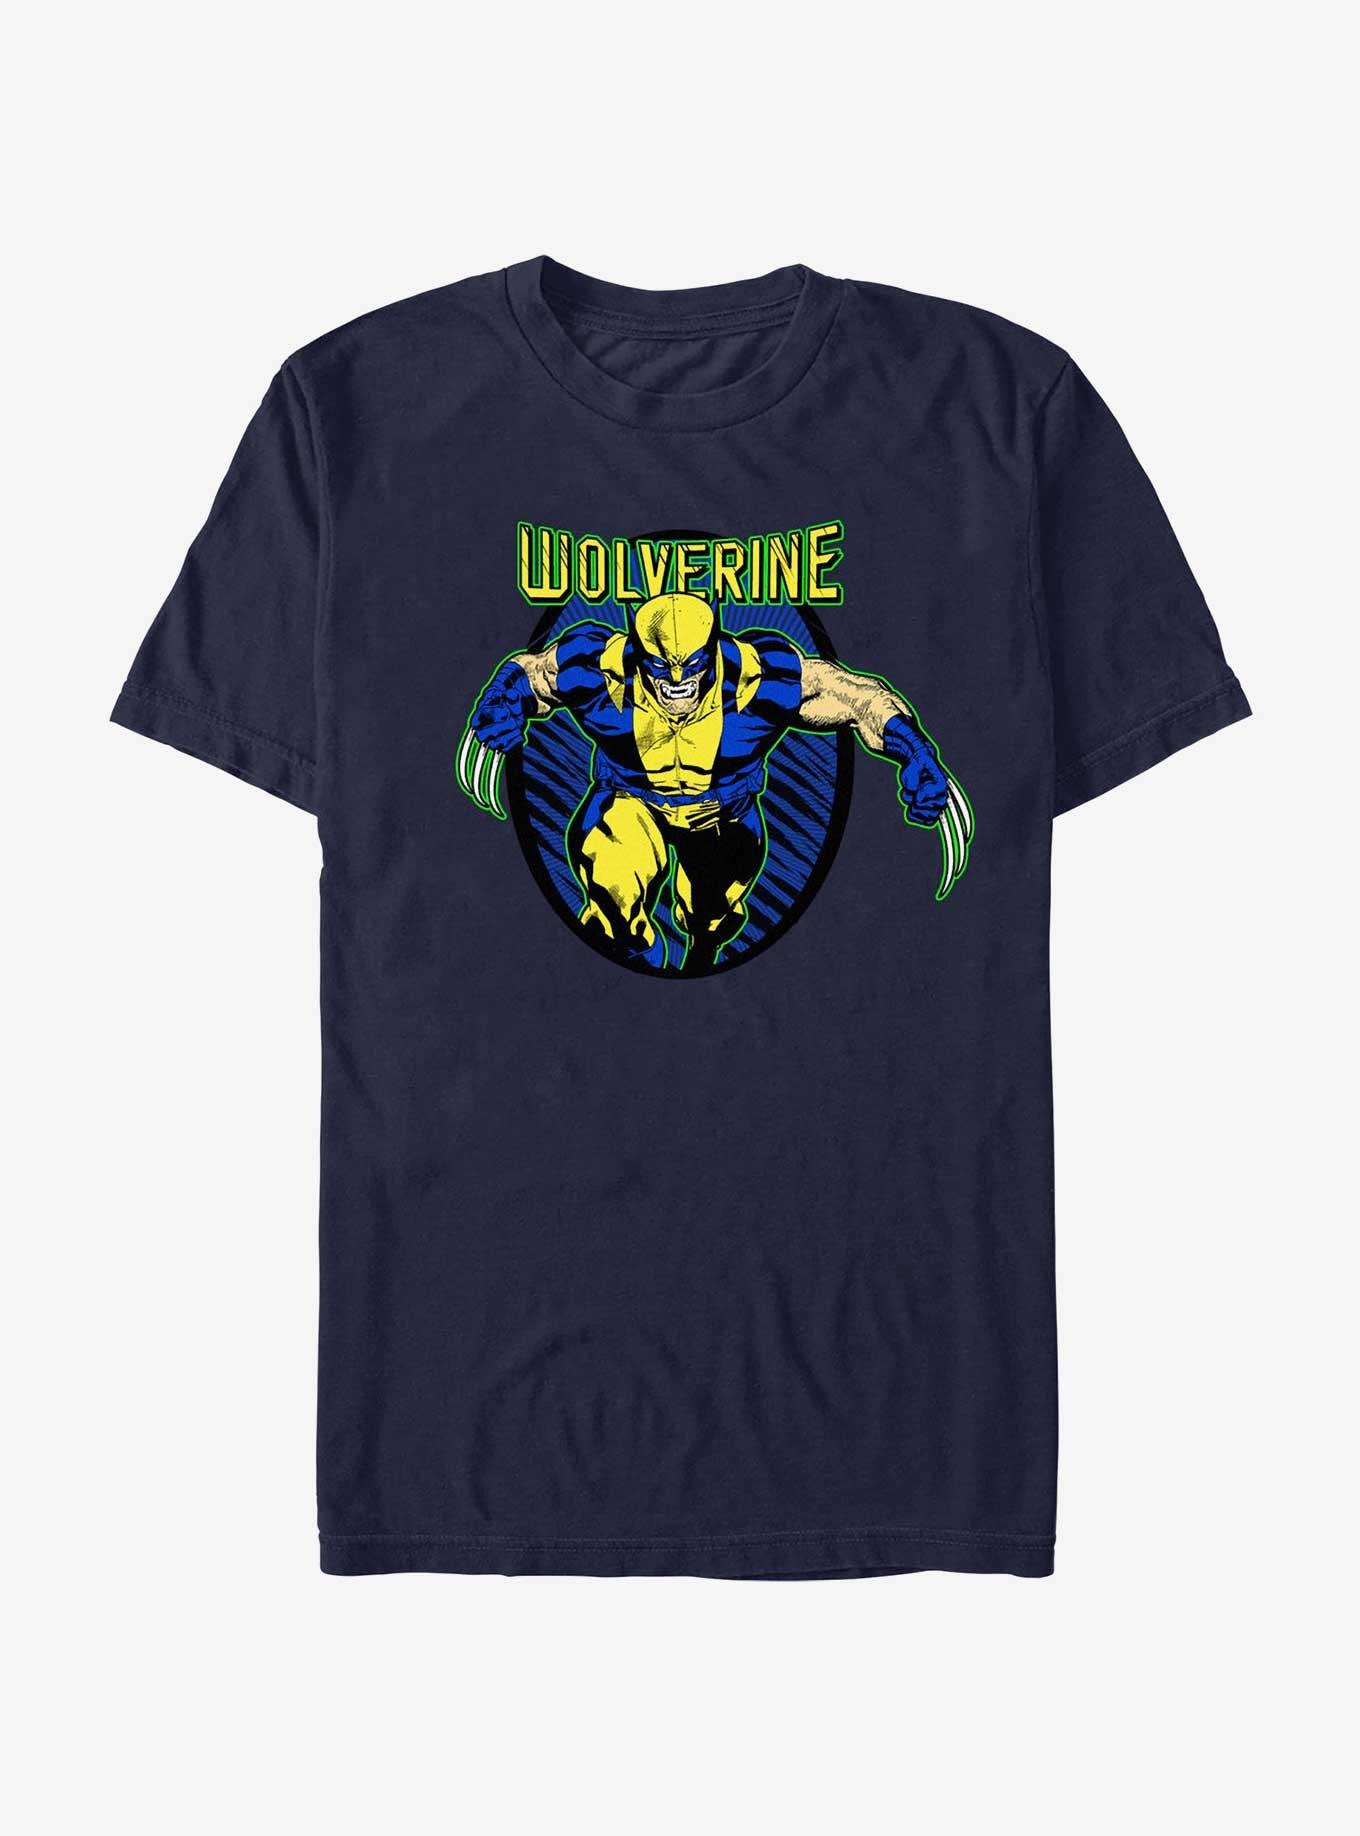 Marvel X-Men Wolverine Stand Out T-Shirt, NAVY, hi-res